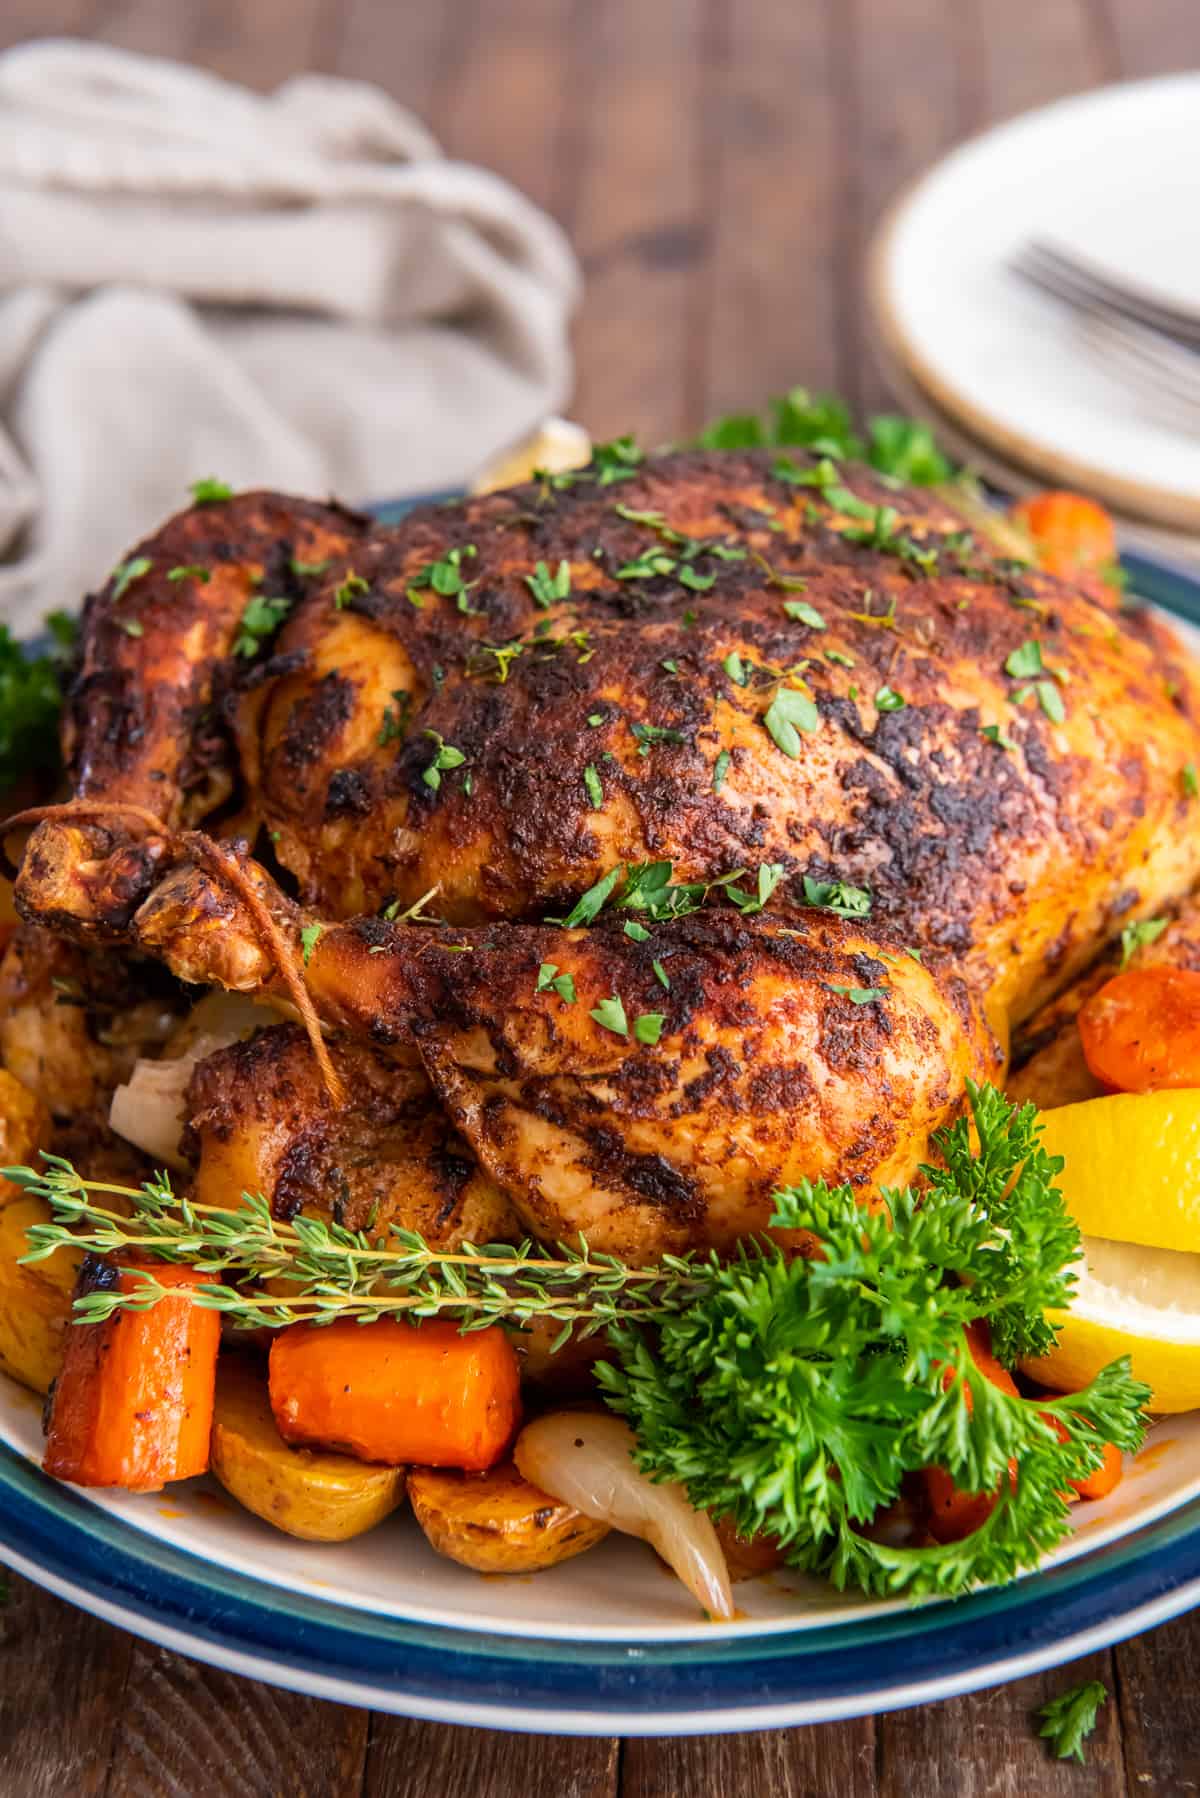 A crispy roast chicken on a platter with carrots and potatoes.